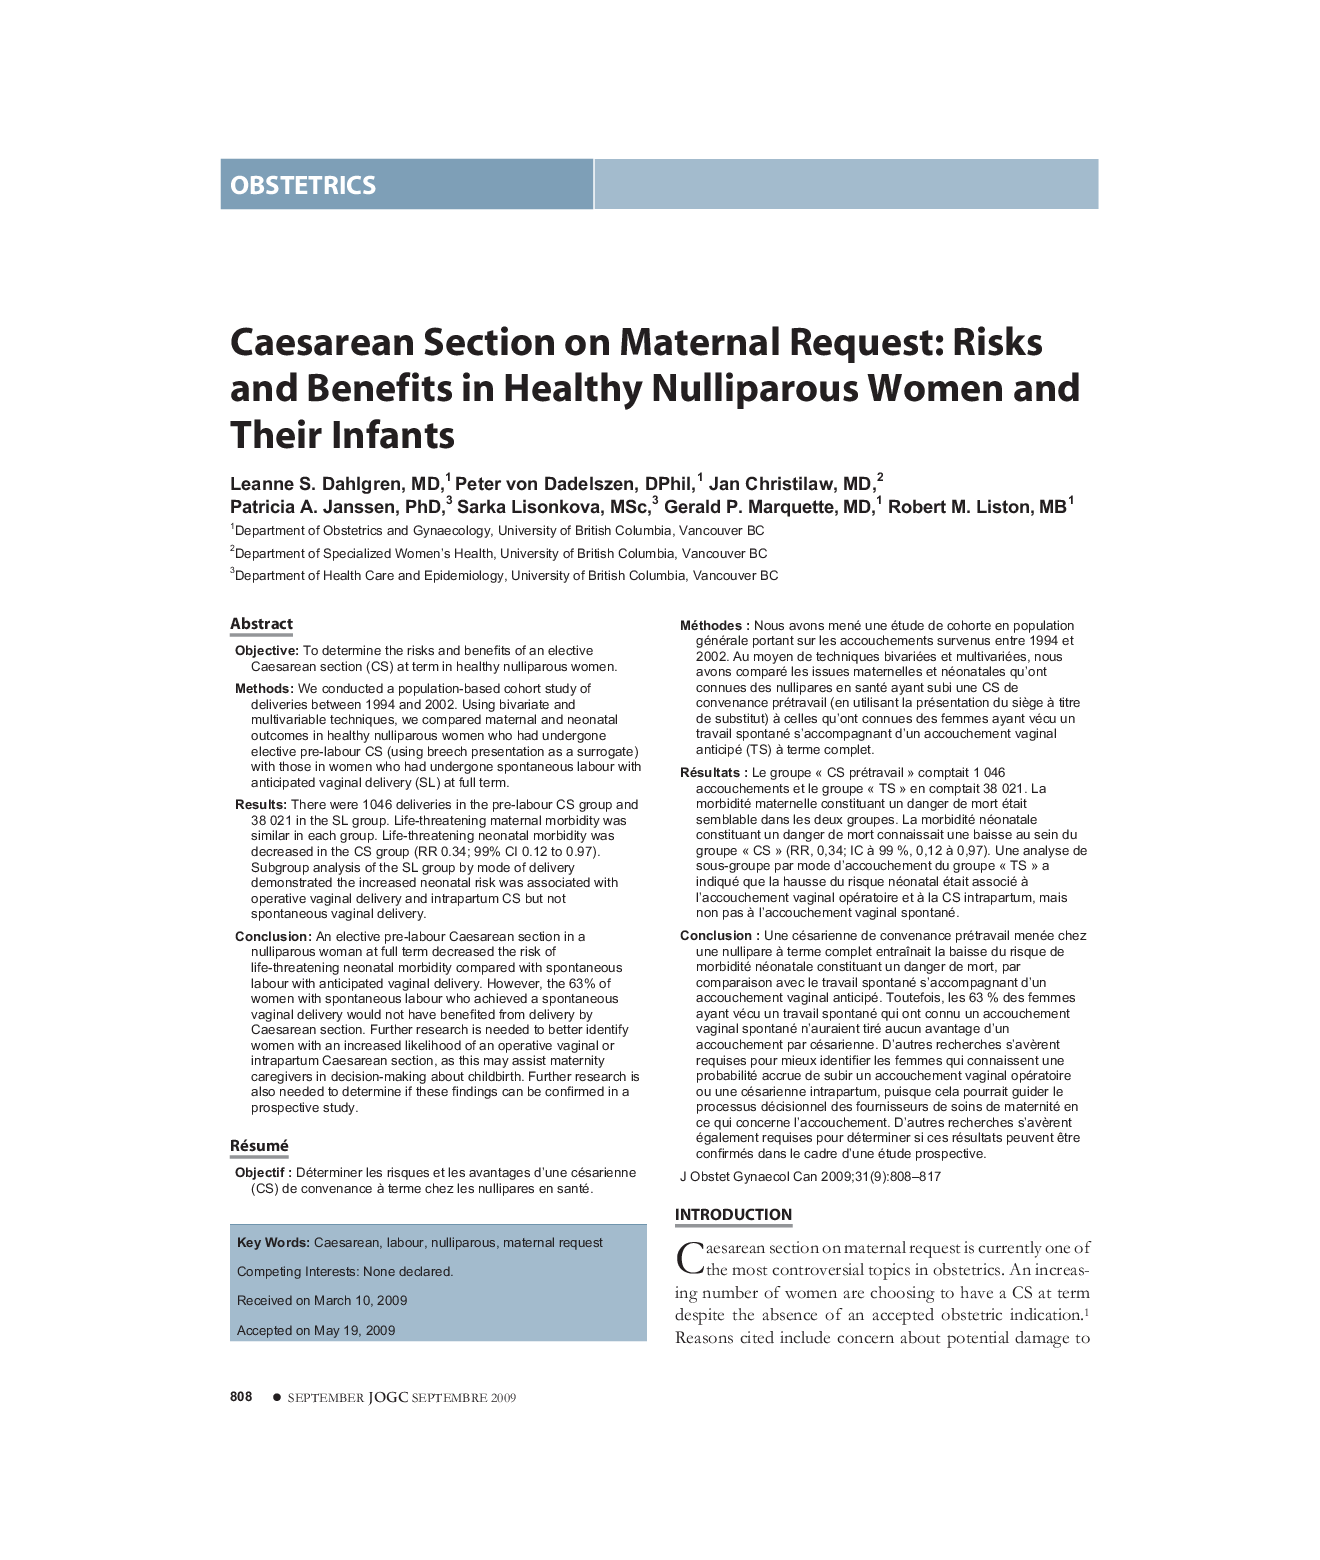 Caesarean Section on Maternal Request: Risks and Benefits in Healthy Nulliparous Women and Their Infants